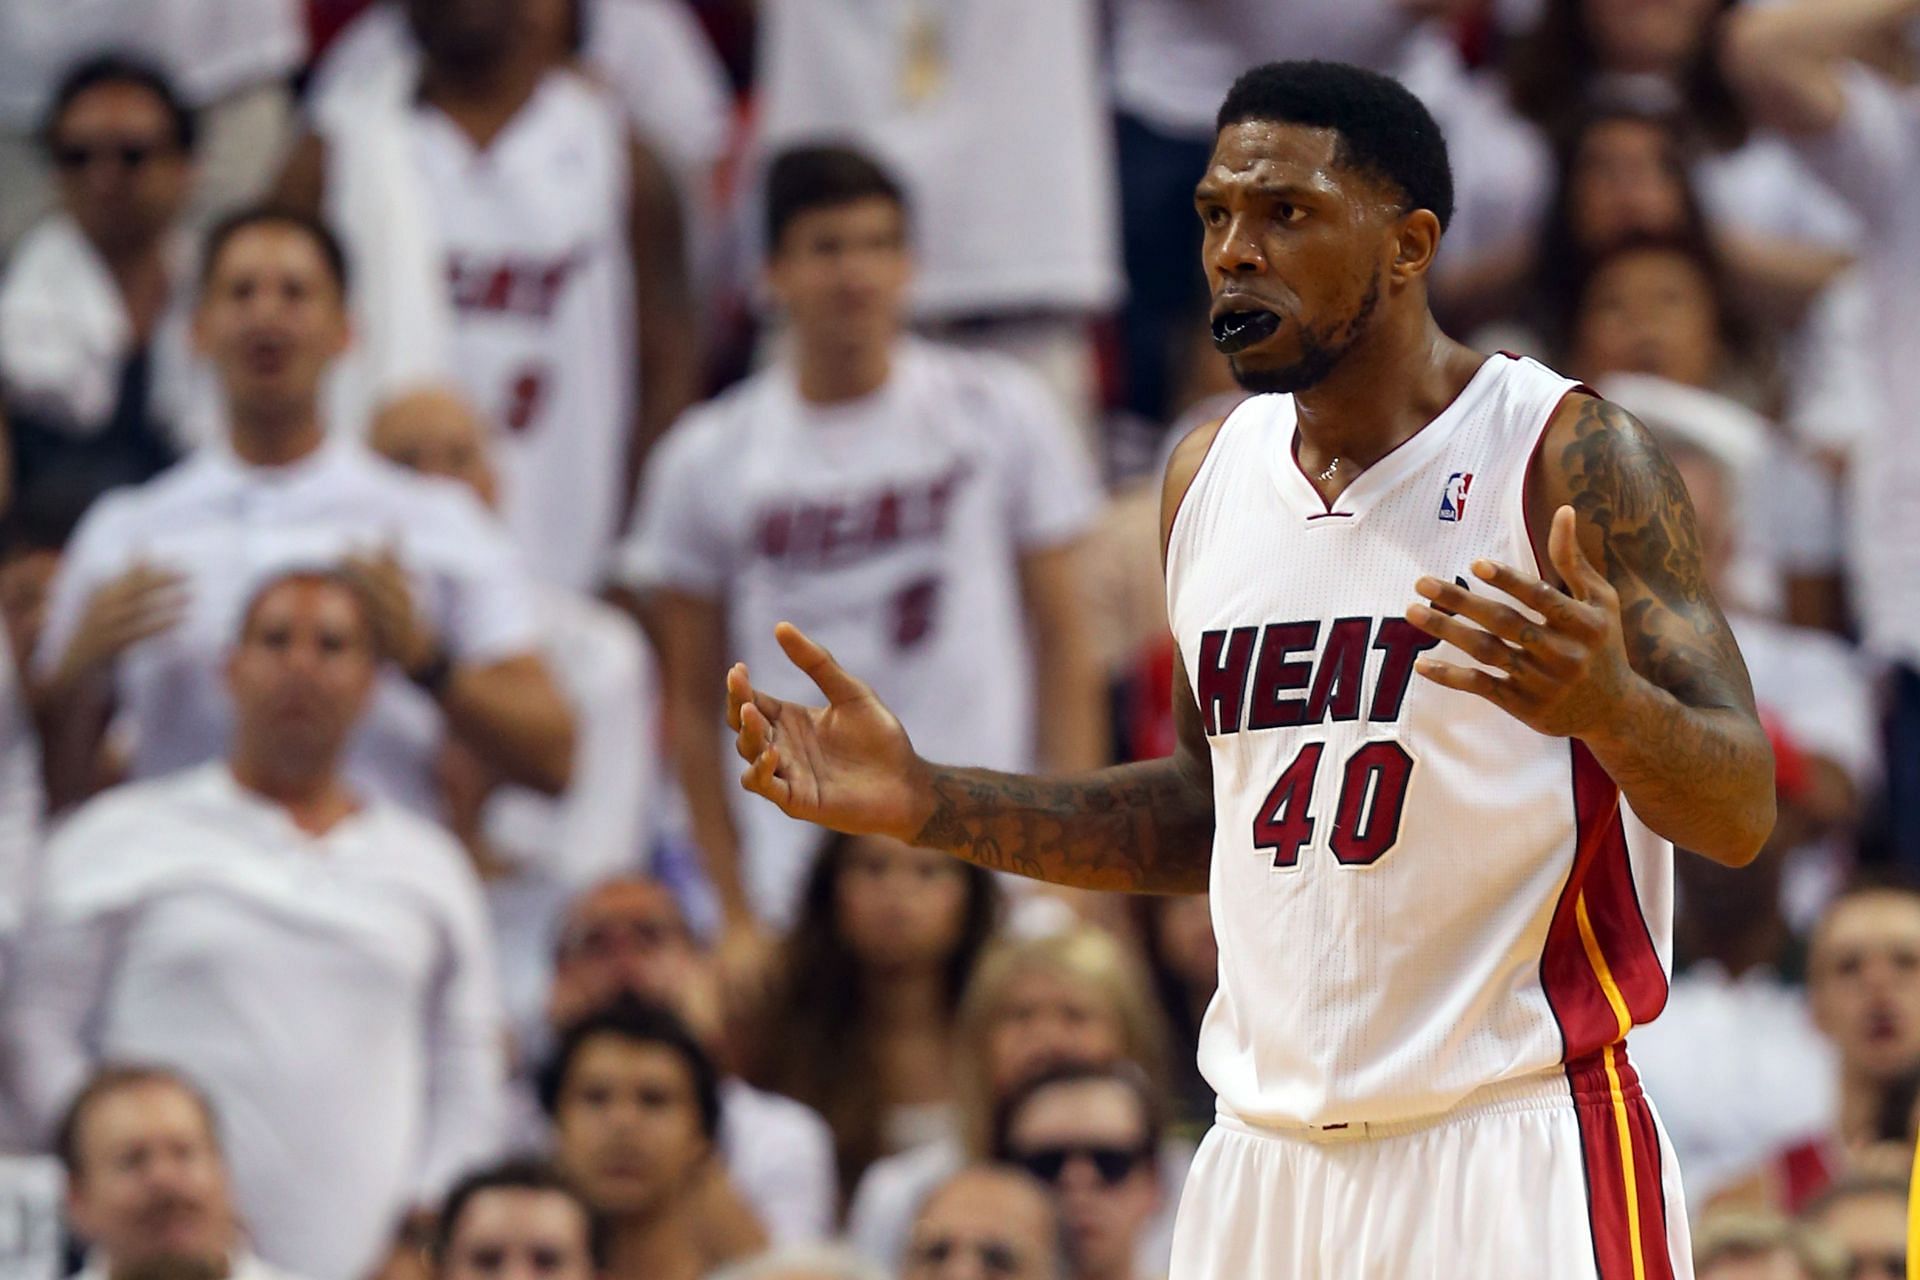 Udonis Haslem has been a huge part of the Miami Heat organization during his NBA career